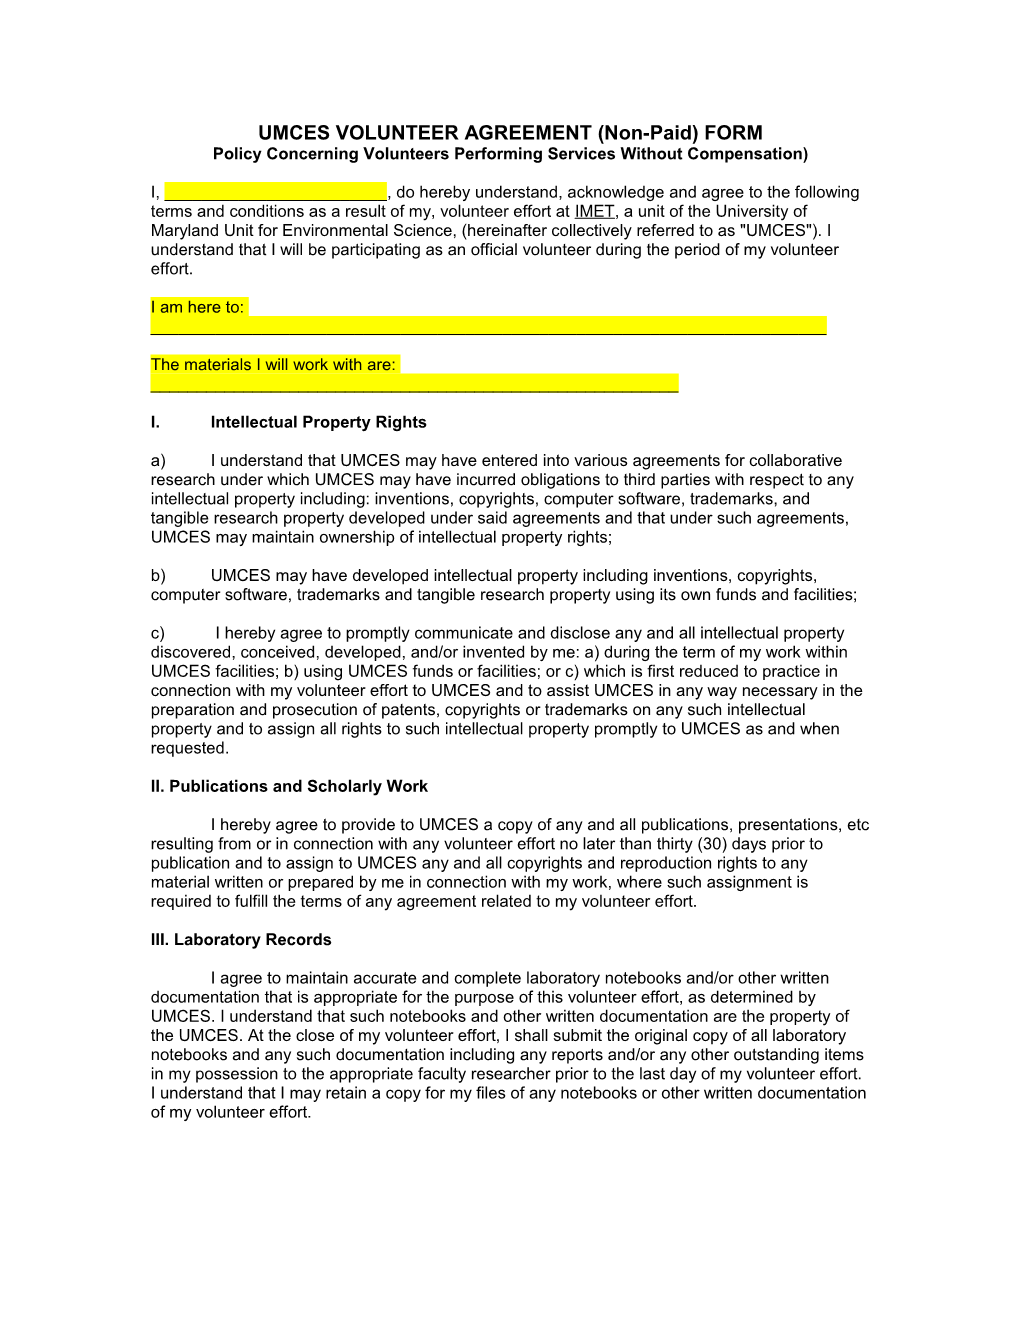 UMCES VOLUNTEER AGREEMENT (Non-Paid) FORM